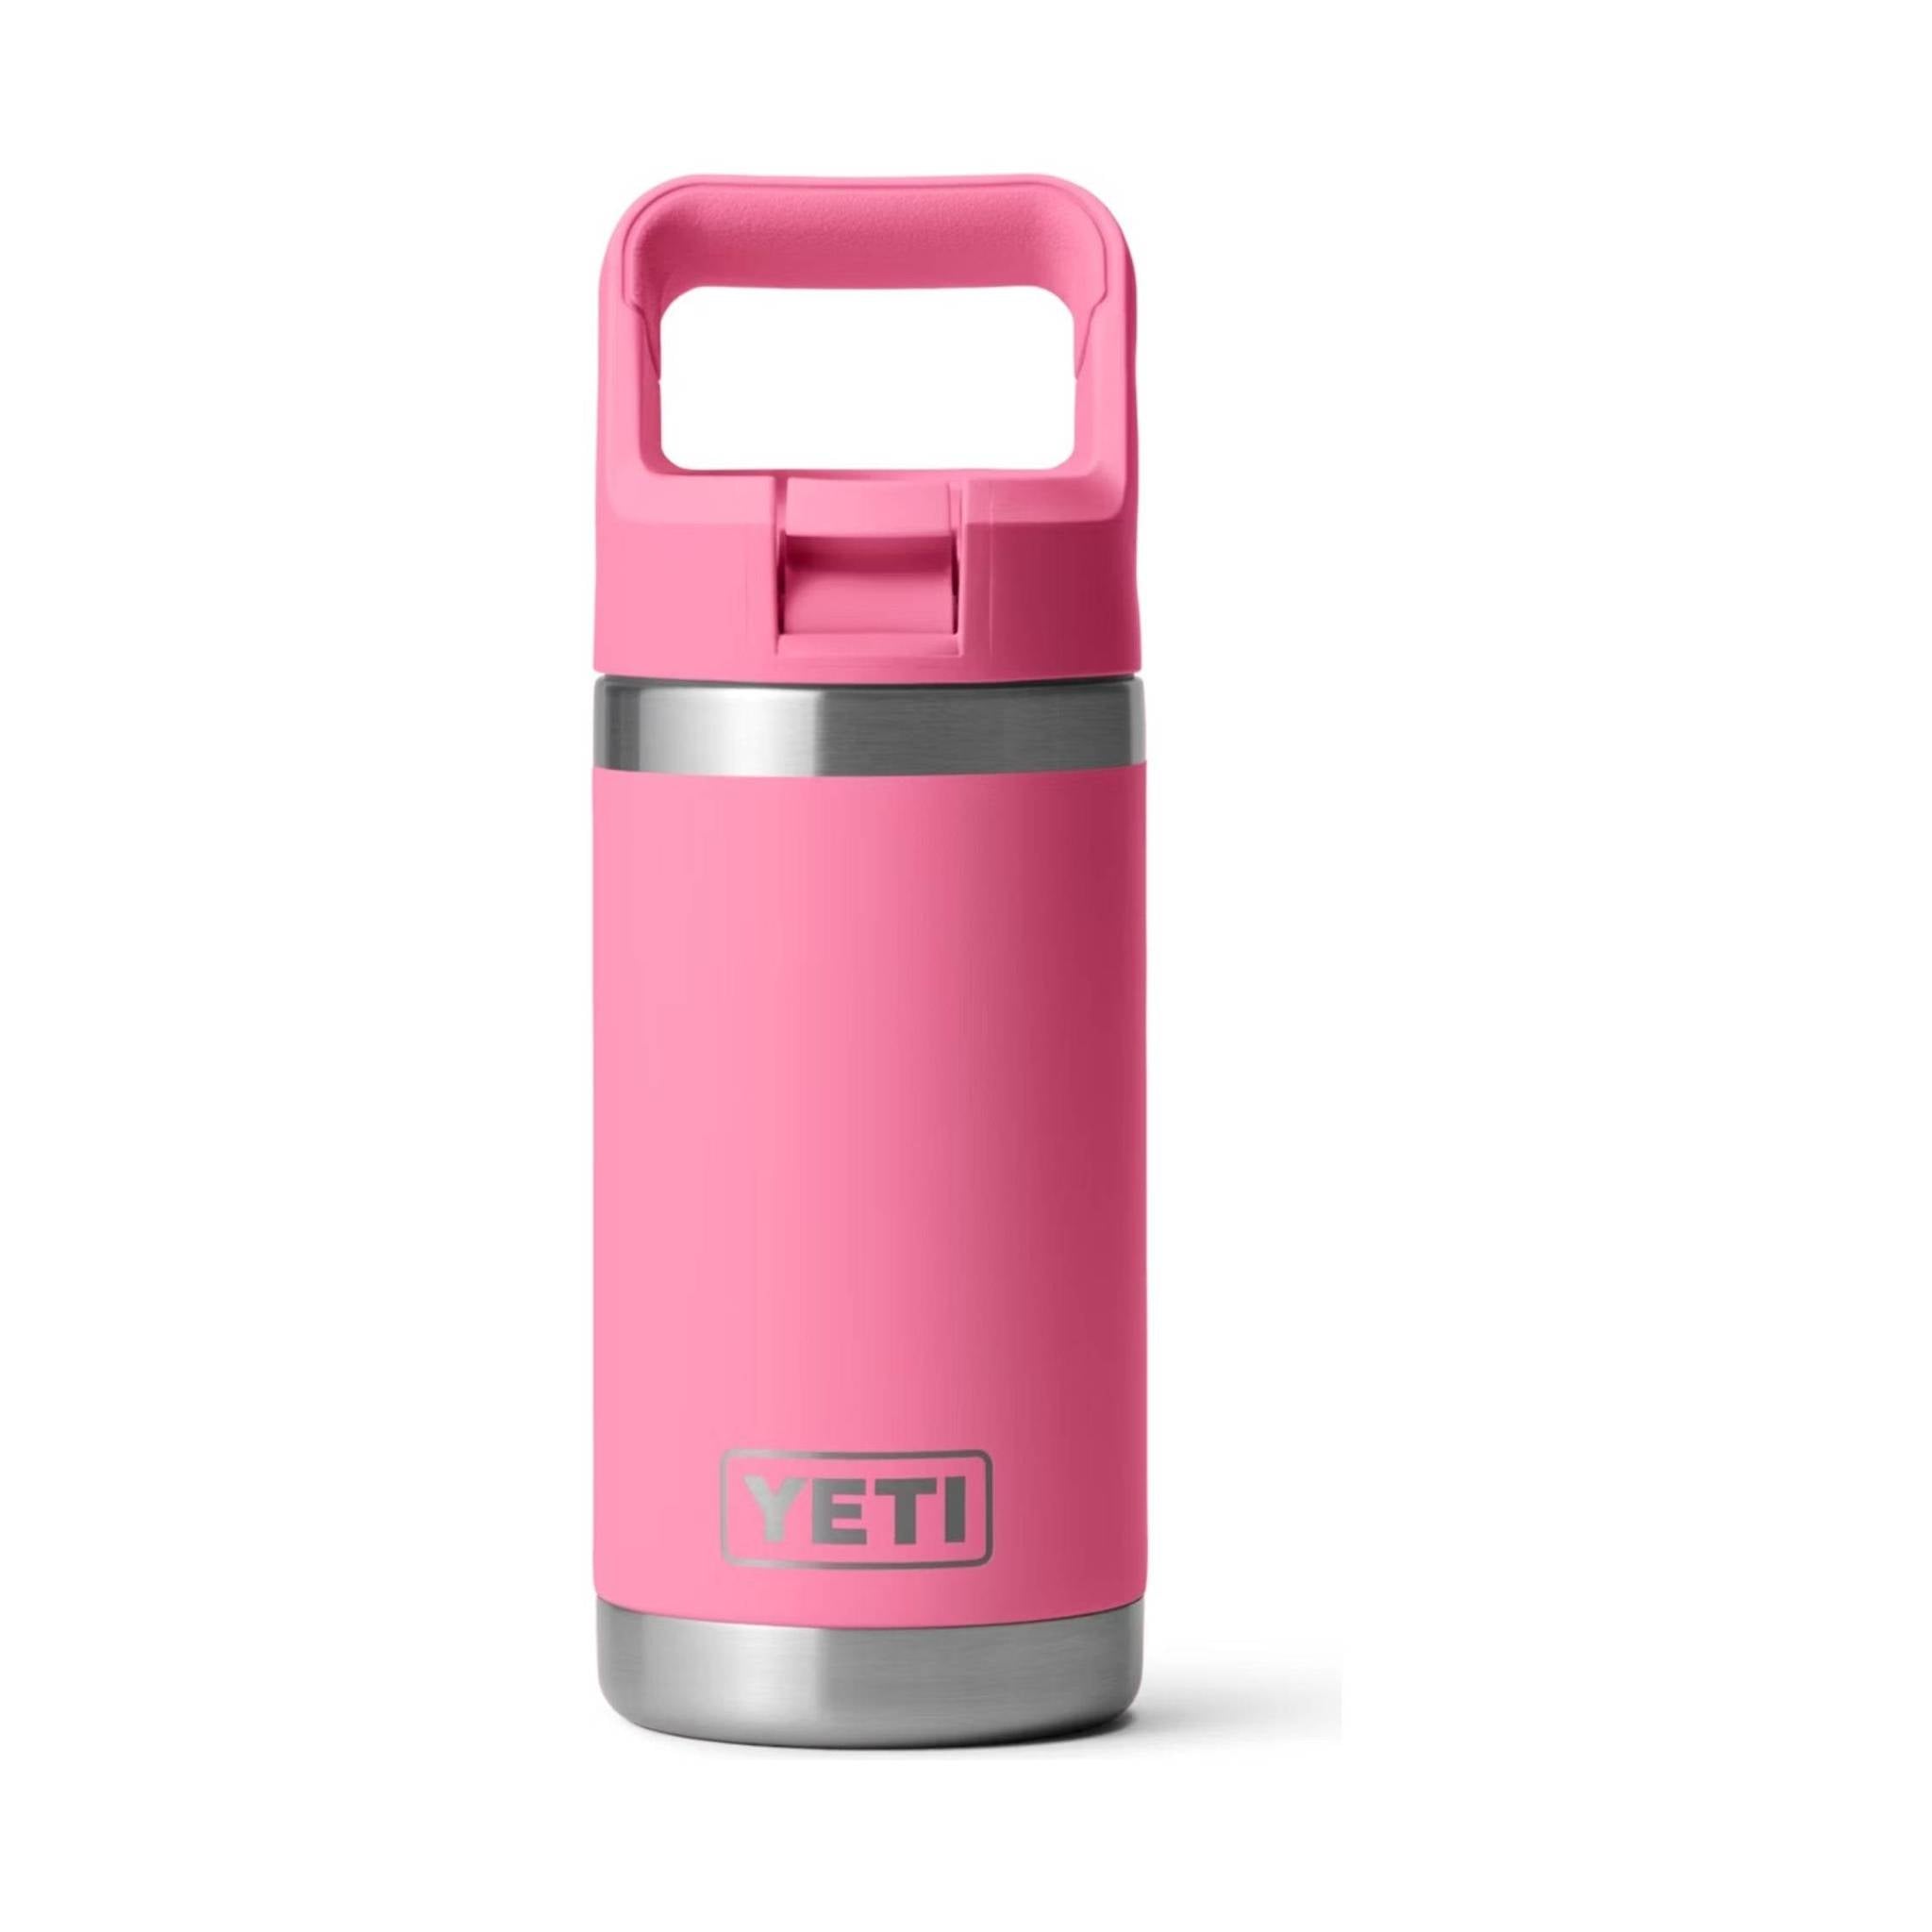 Ello 12 Ounce Pink Riley Junior Stainless Steel Water Bottle - Each